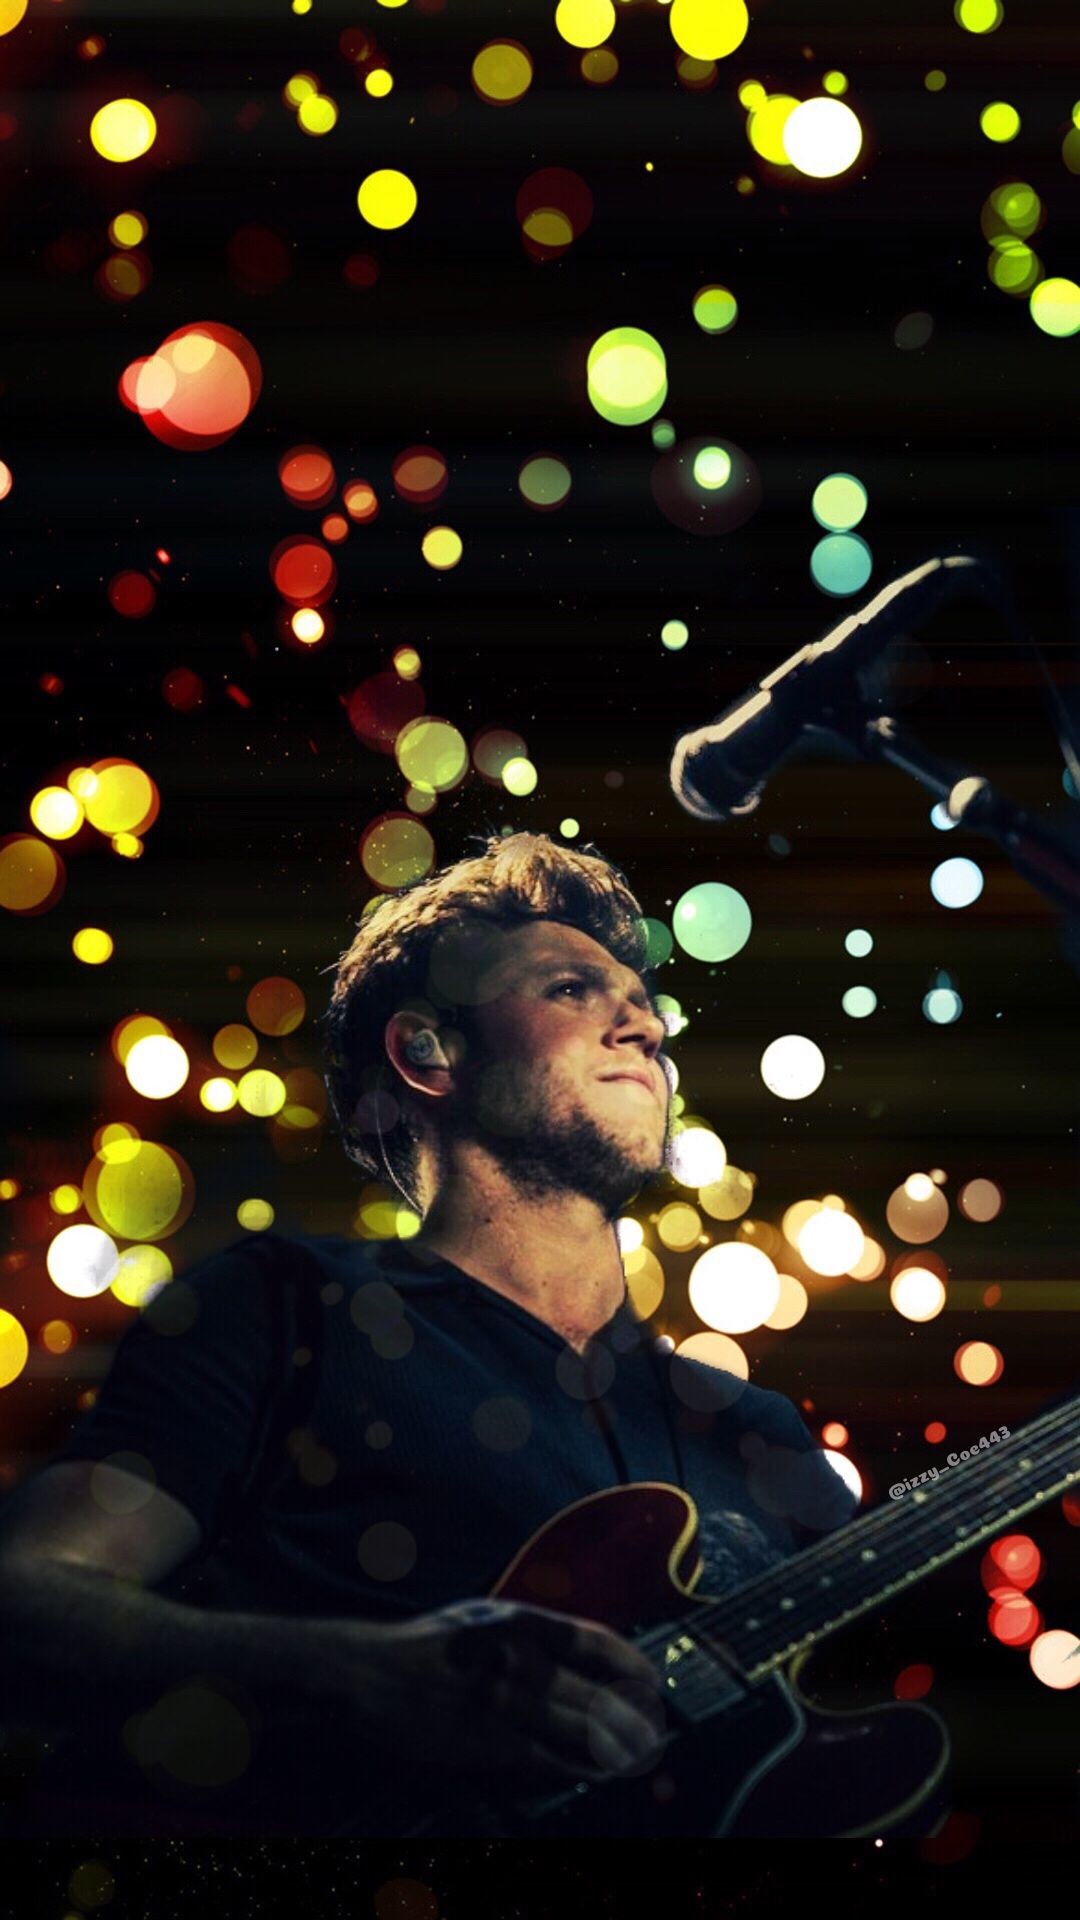 1080x1920 A Niall Horan Wallpaper w/ lights in the background â¤ï¸